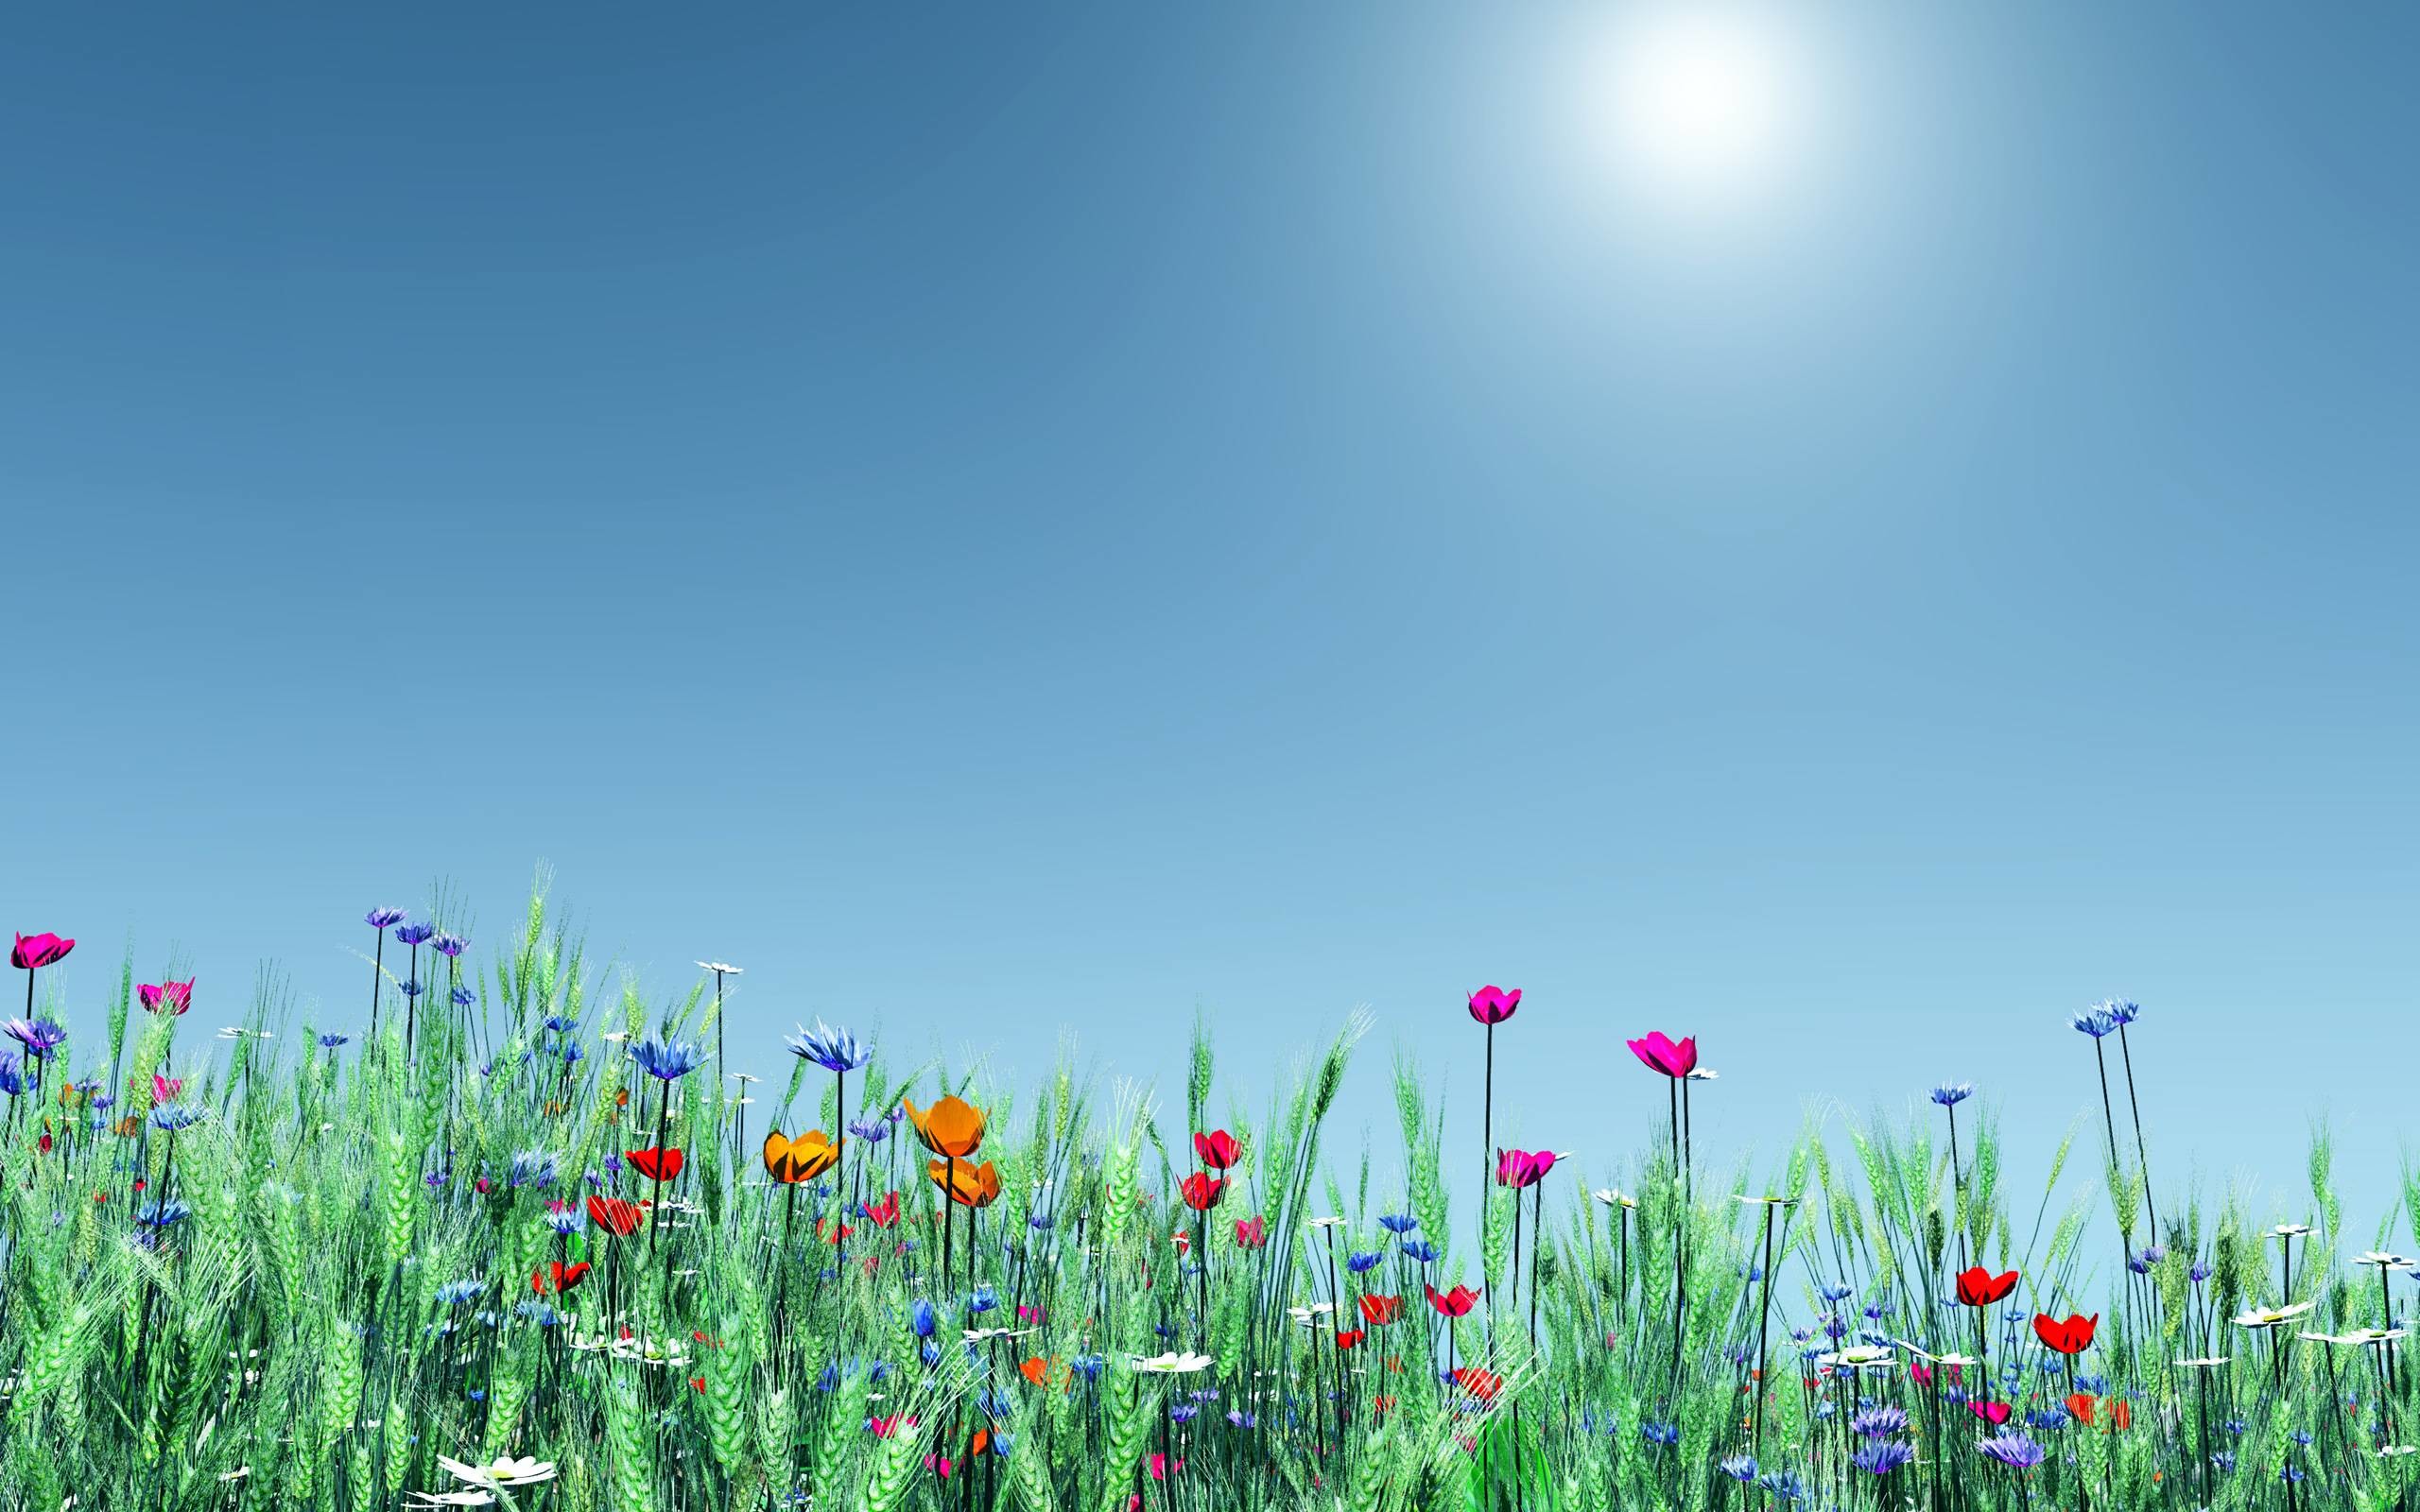 Spring Flowers Windows 8 and 8.1 Wallpapers Windows 8.1 Themes